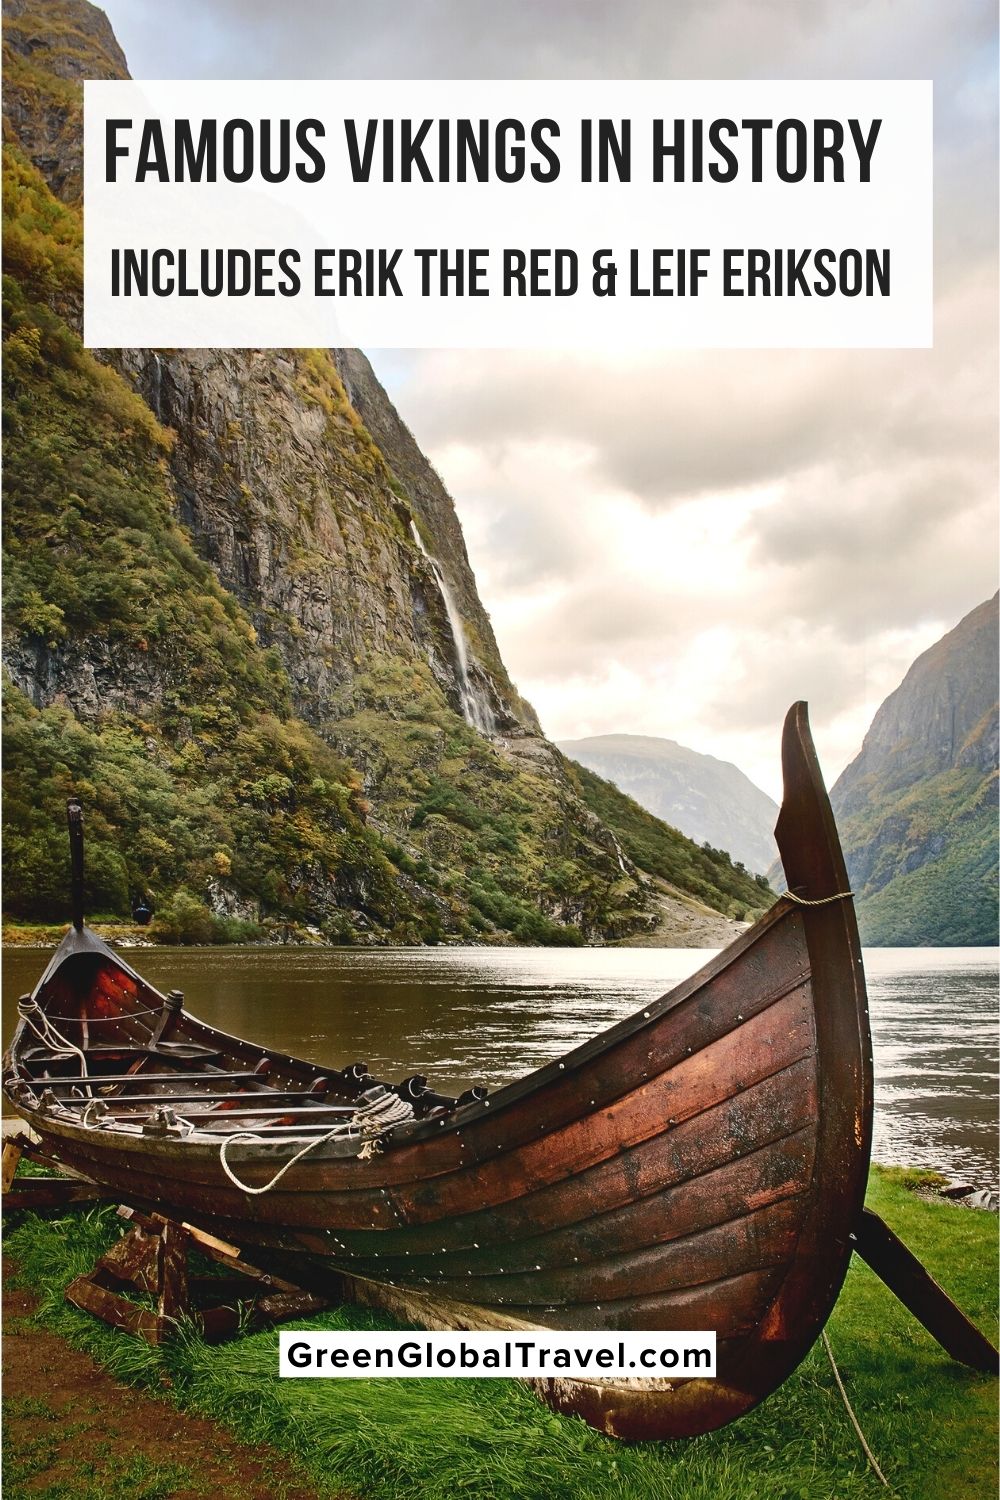 A look at the Vikings’ westward expansion including the explorations of Leif Ericsson and his legendary father, Erik the Red. Includes the history of Vikings in Iceland, Vikings in Greenland, and Vikings in Canada.